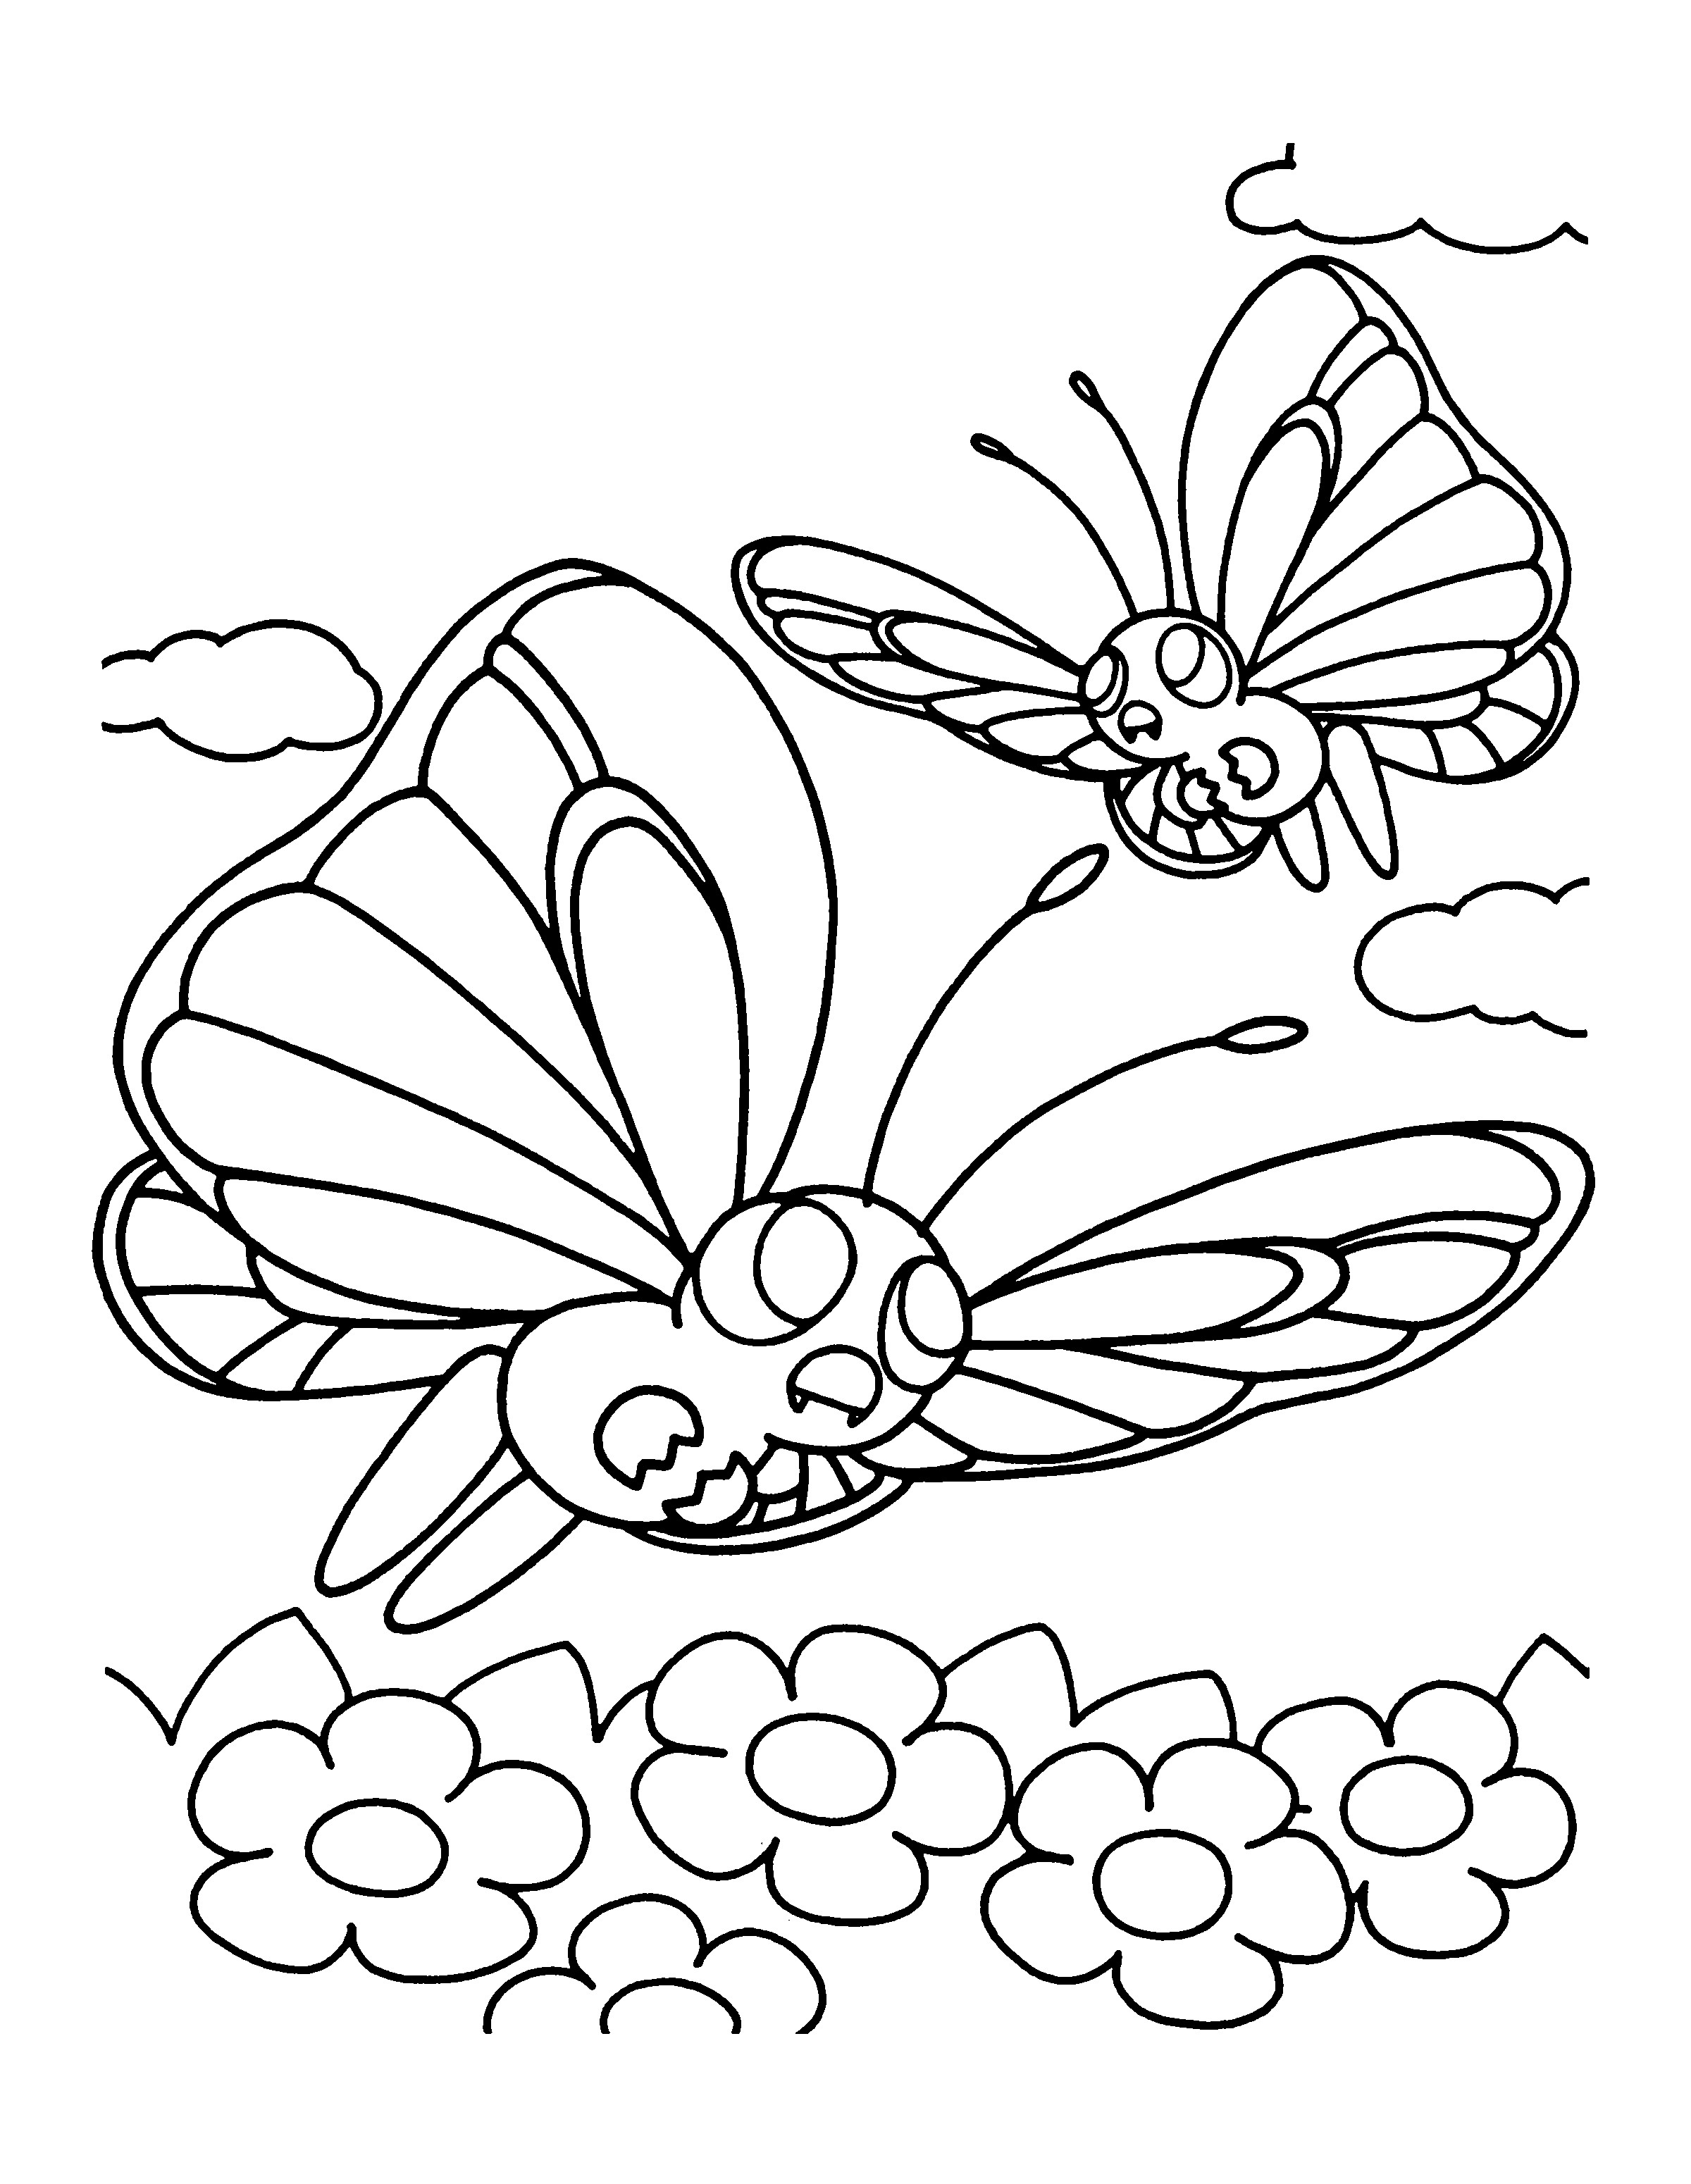 Butterfree Coloring Page Within Pokemon Coloring Pages Butterfree Coloring